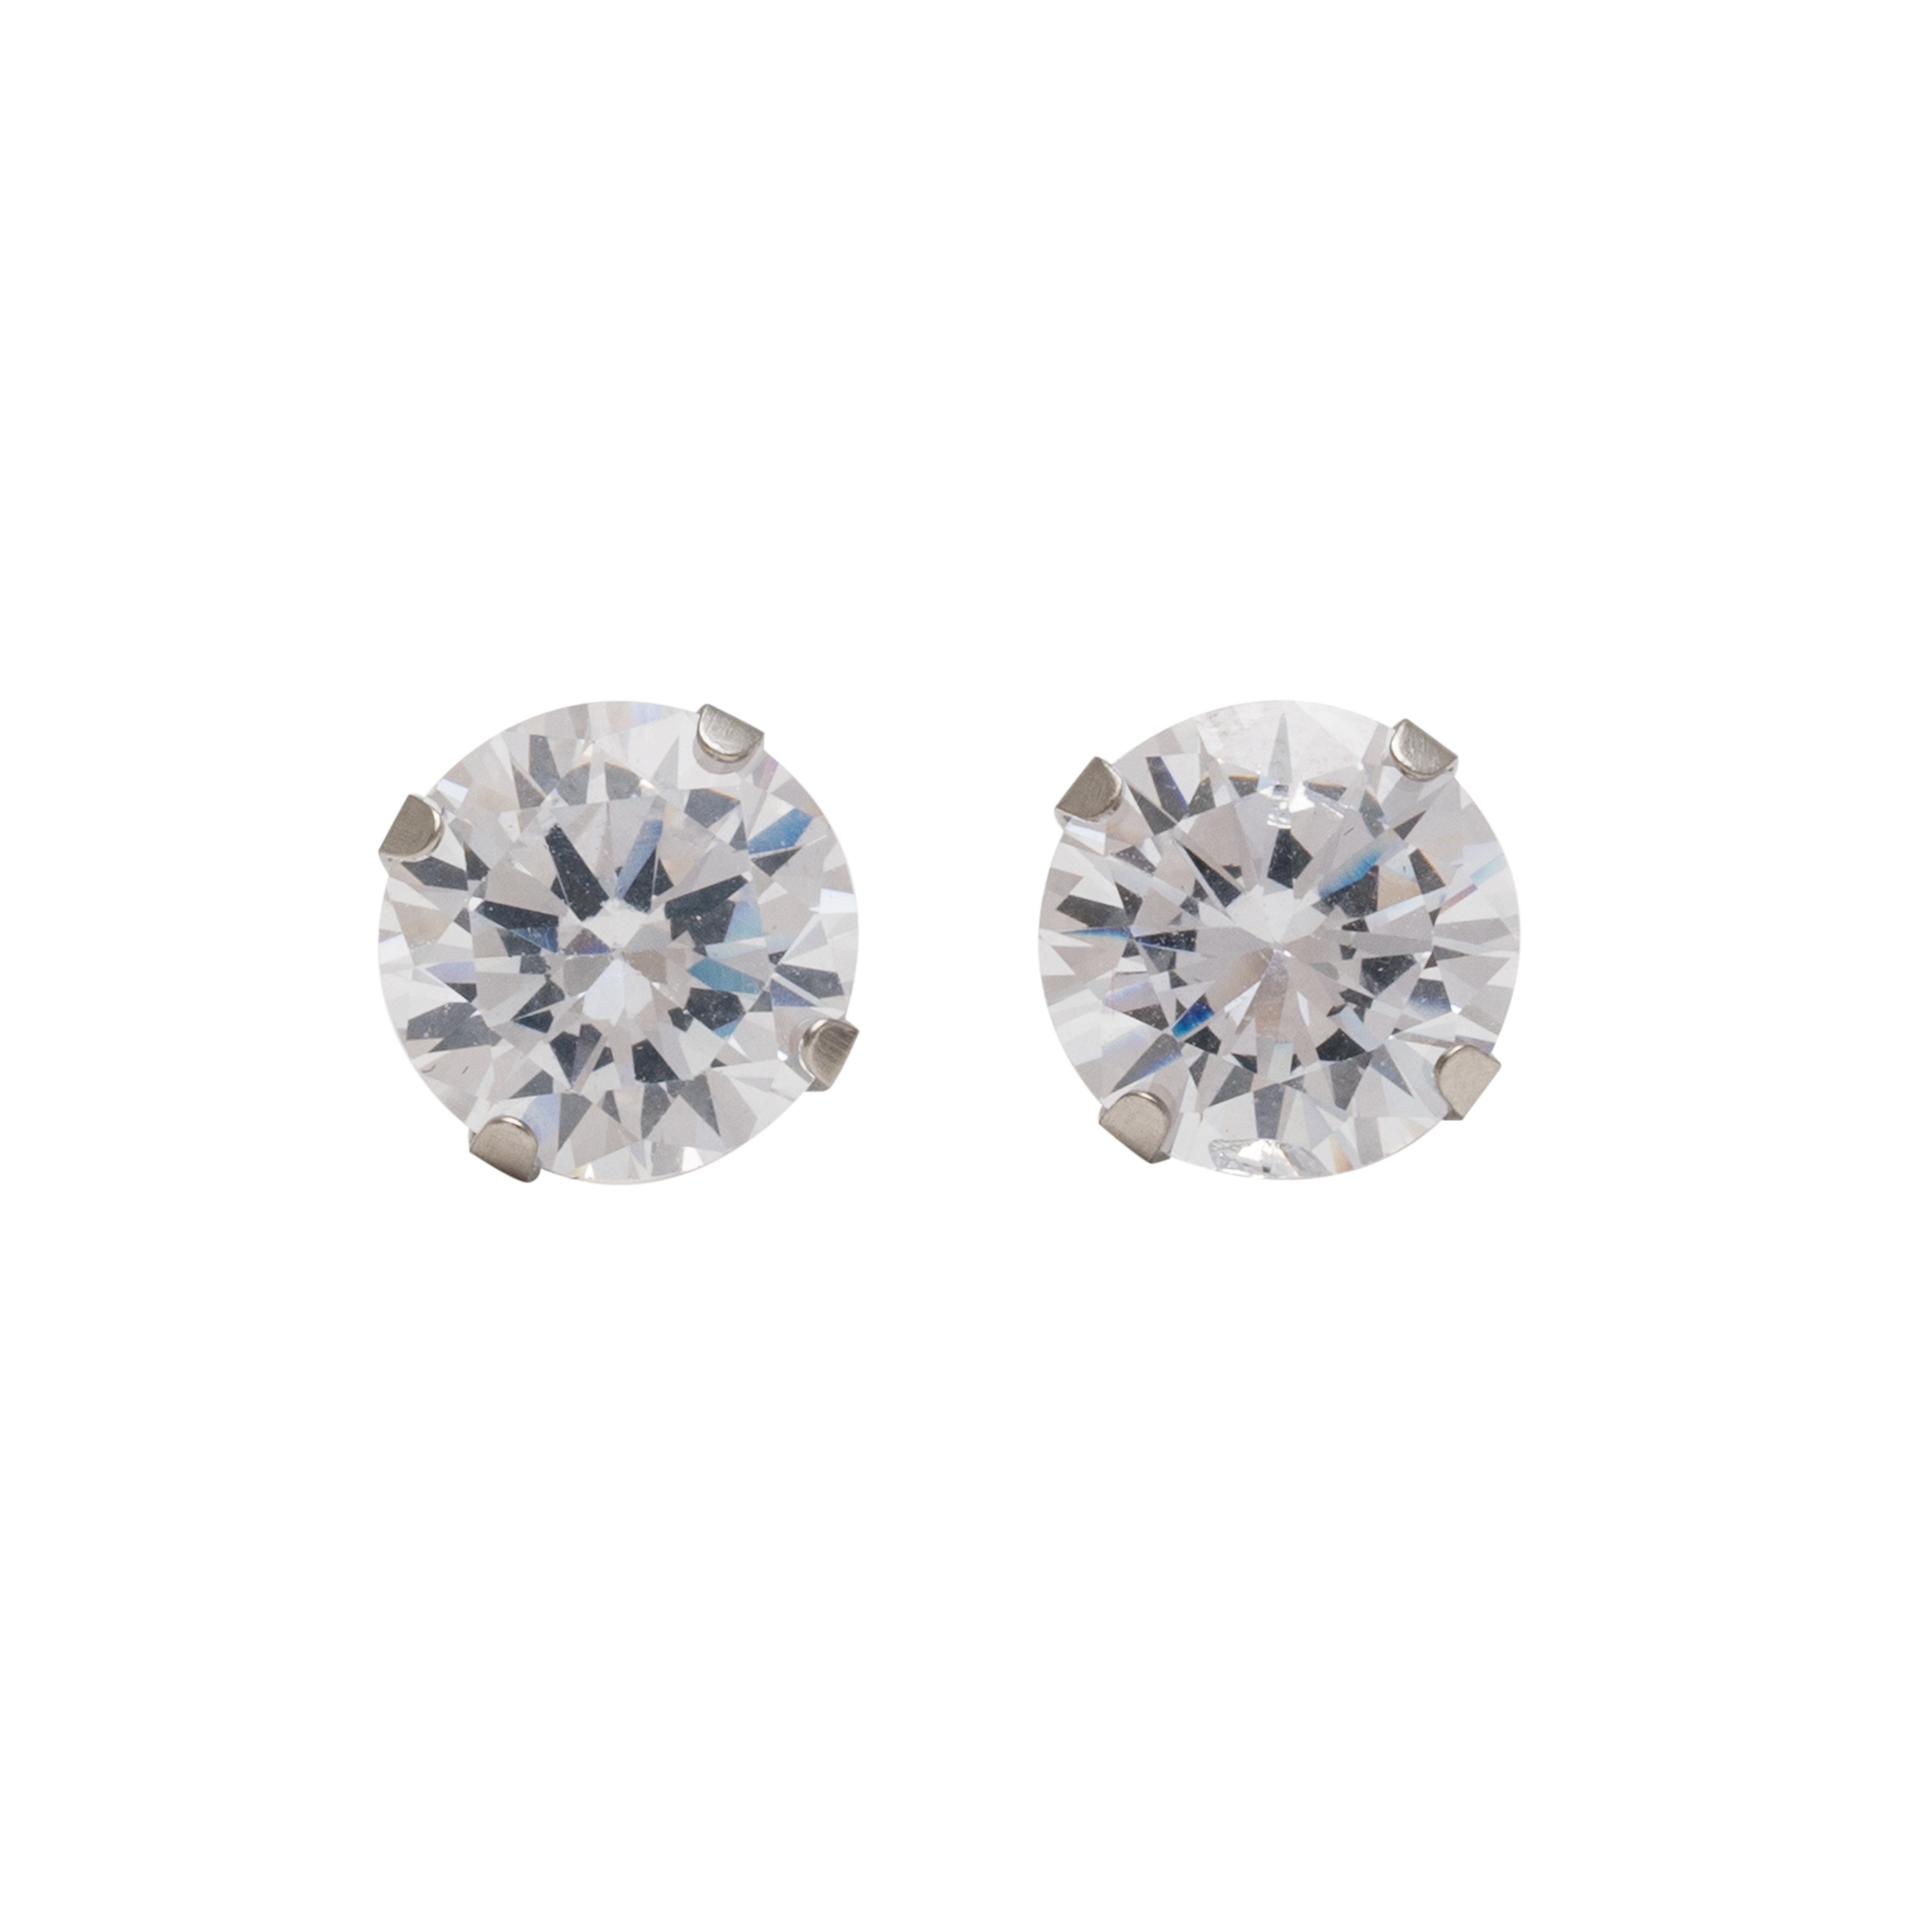 8MM - Cubic Zirconia (Round) - Crystal Clear | Stainless Steel Simple Yet Stylish, Cute & Trending Fashion Earrings / Ear Studs for Girls & Women Online @ Pakistan | Studex Sensitive (for daily wear)